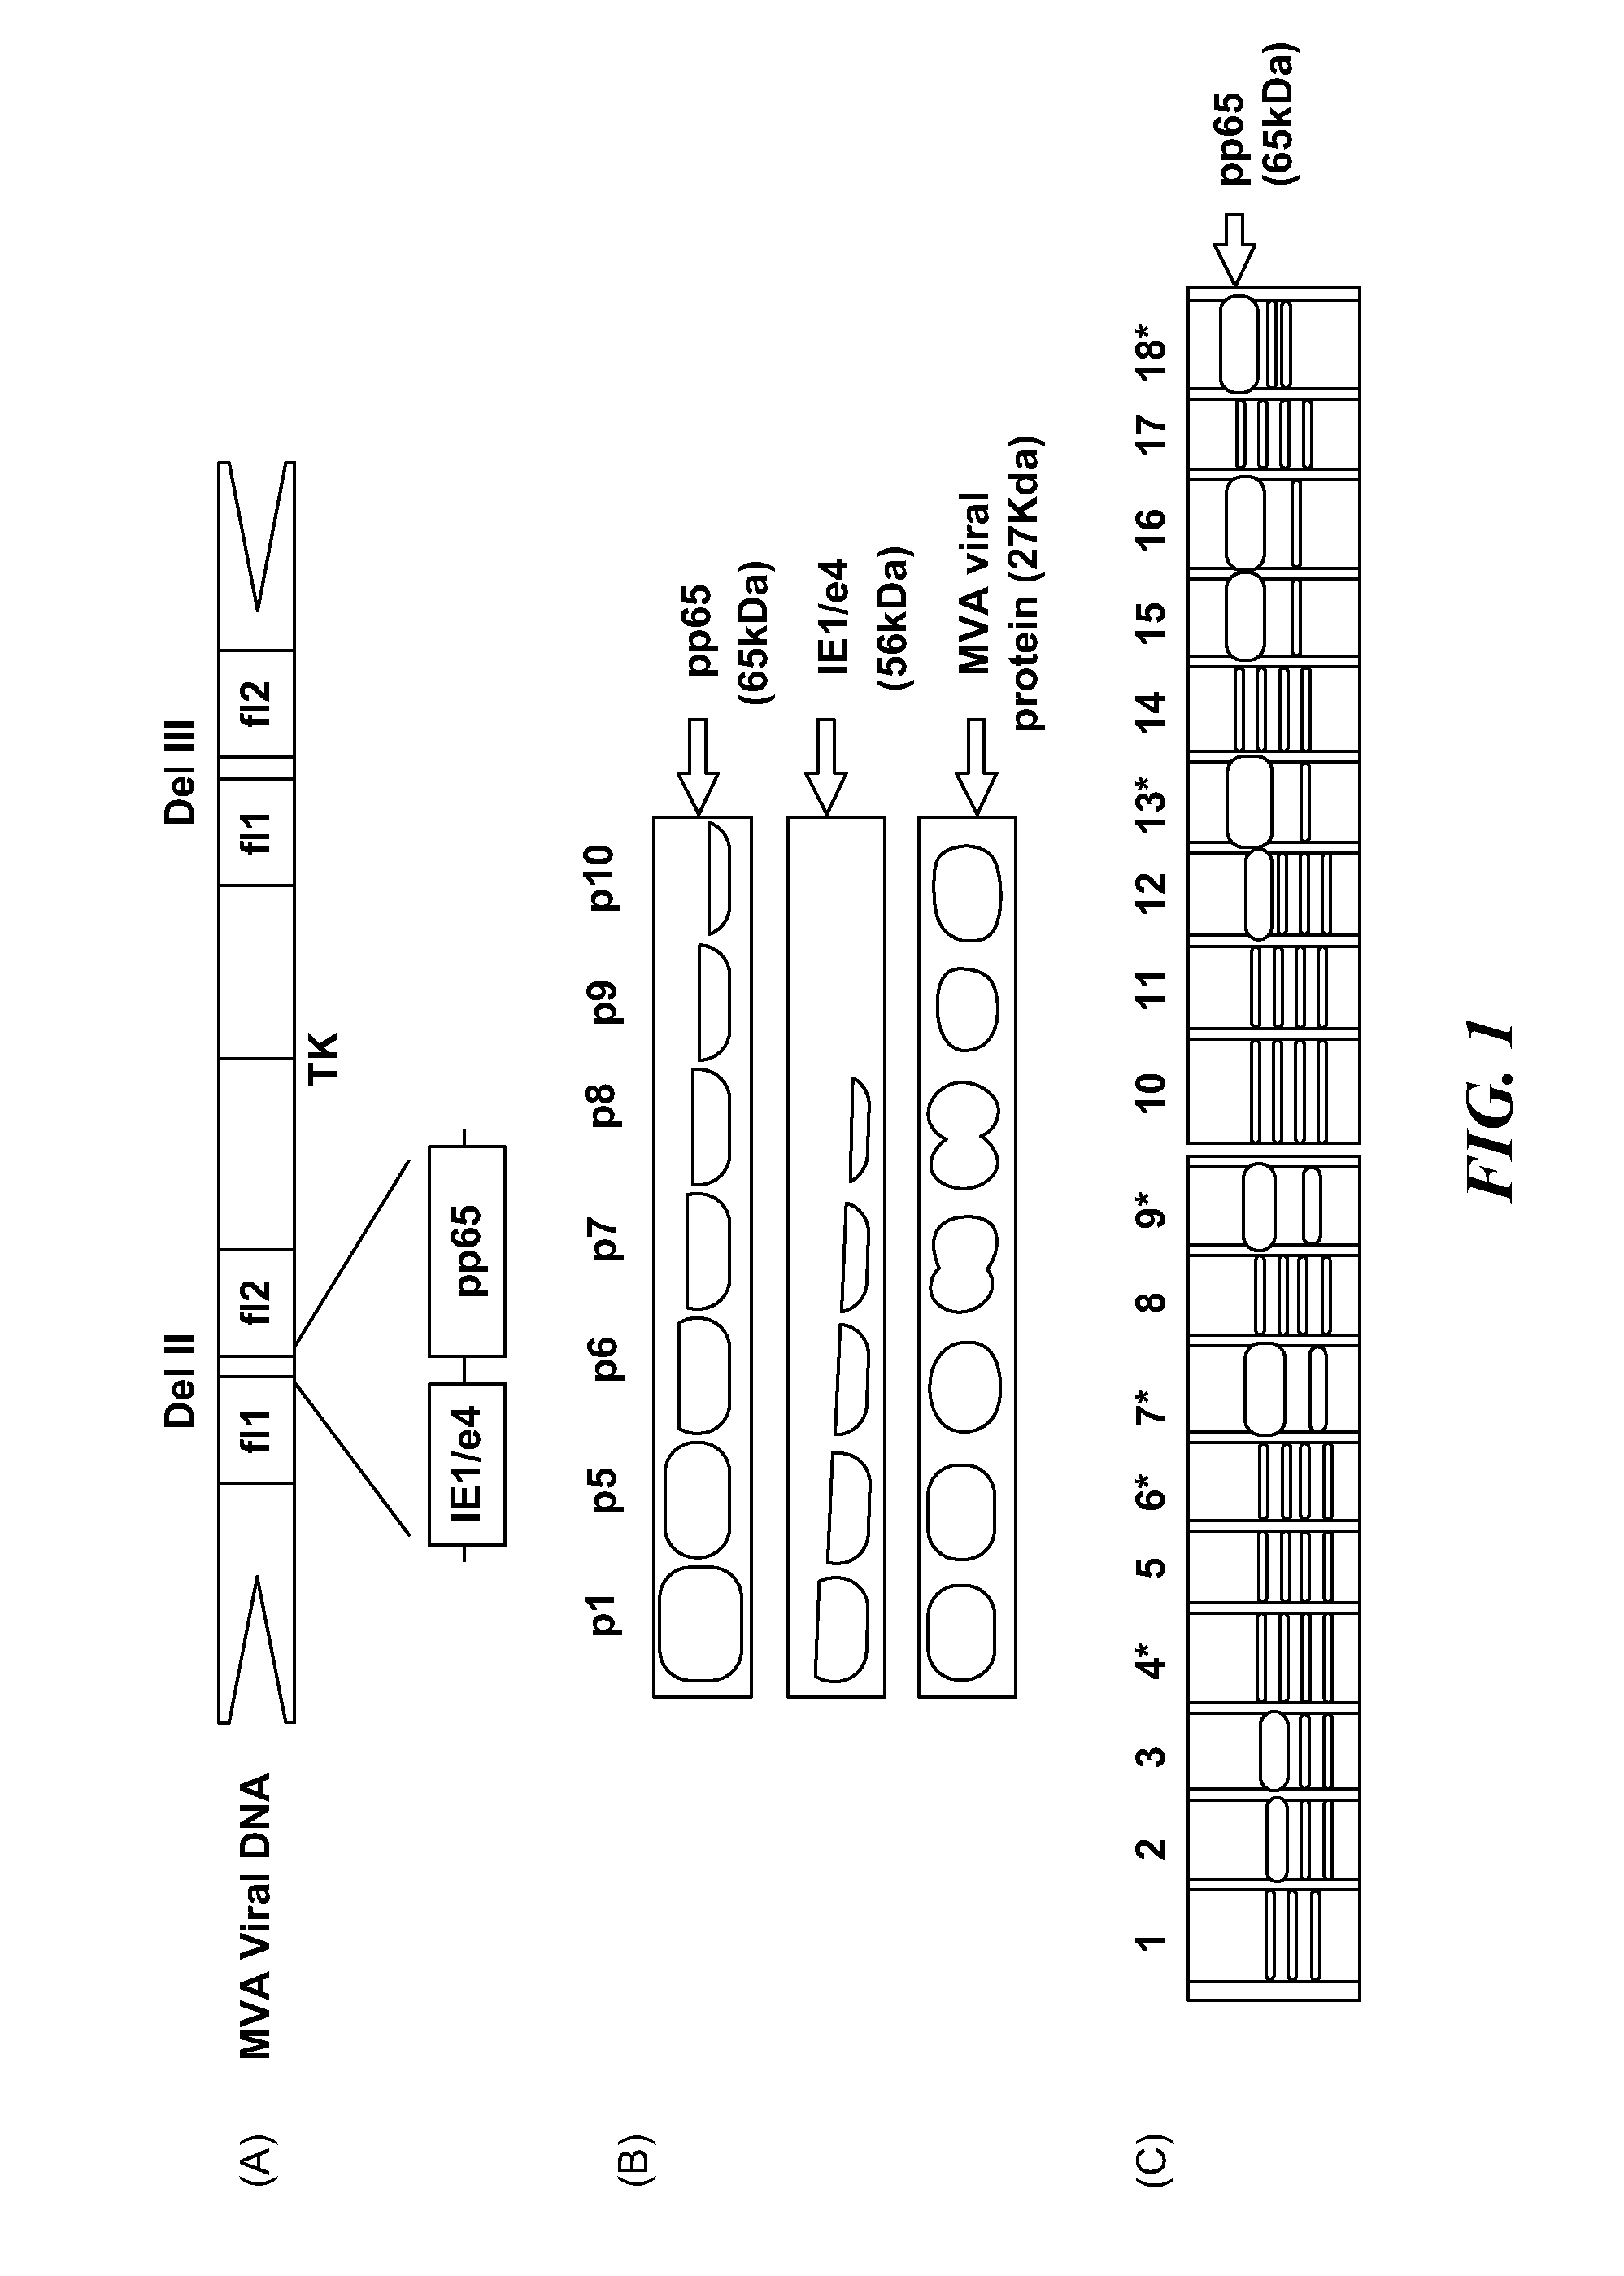 Genetically stable recombinant modified vaccinia ankara (rMVA) vaccines and methods of preparation thereof